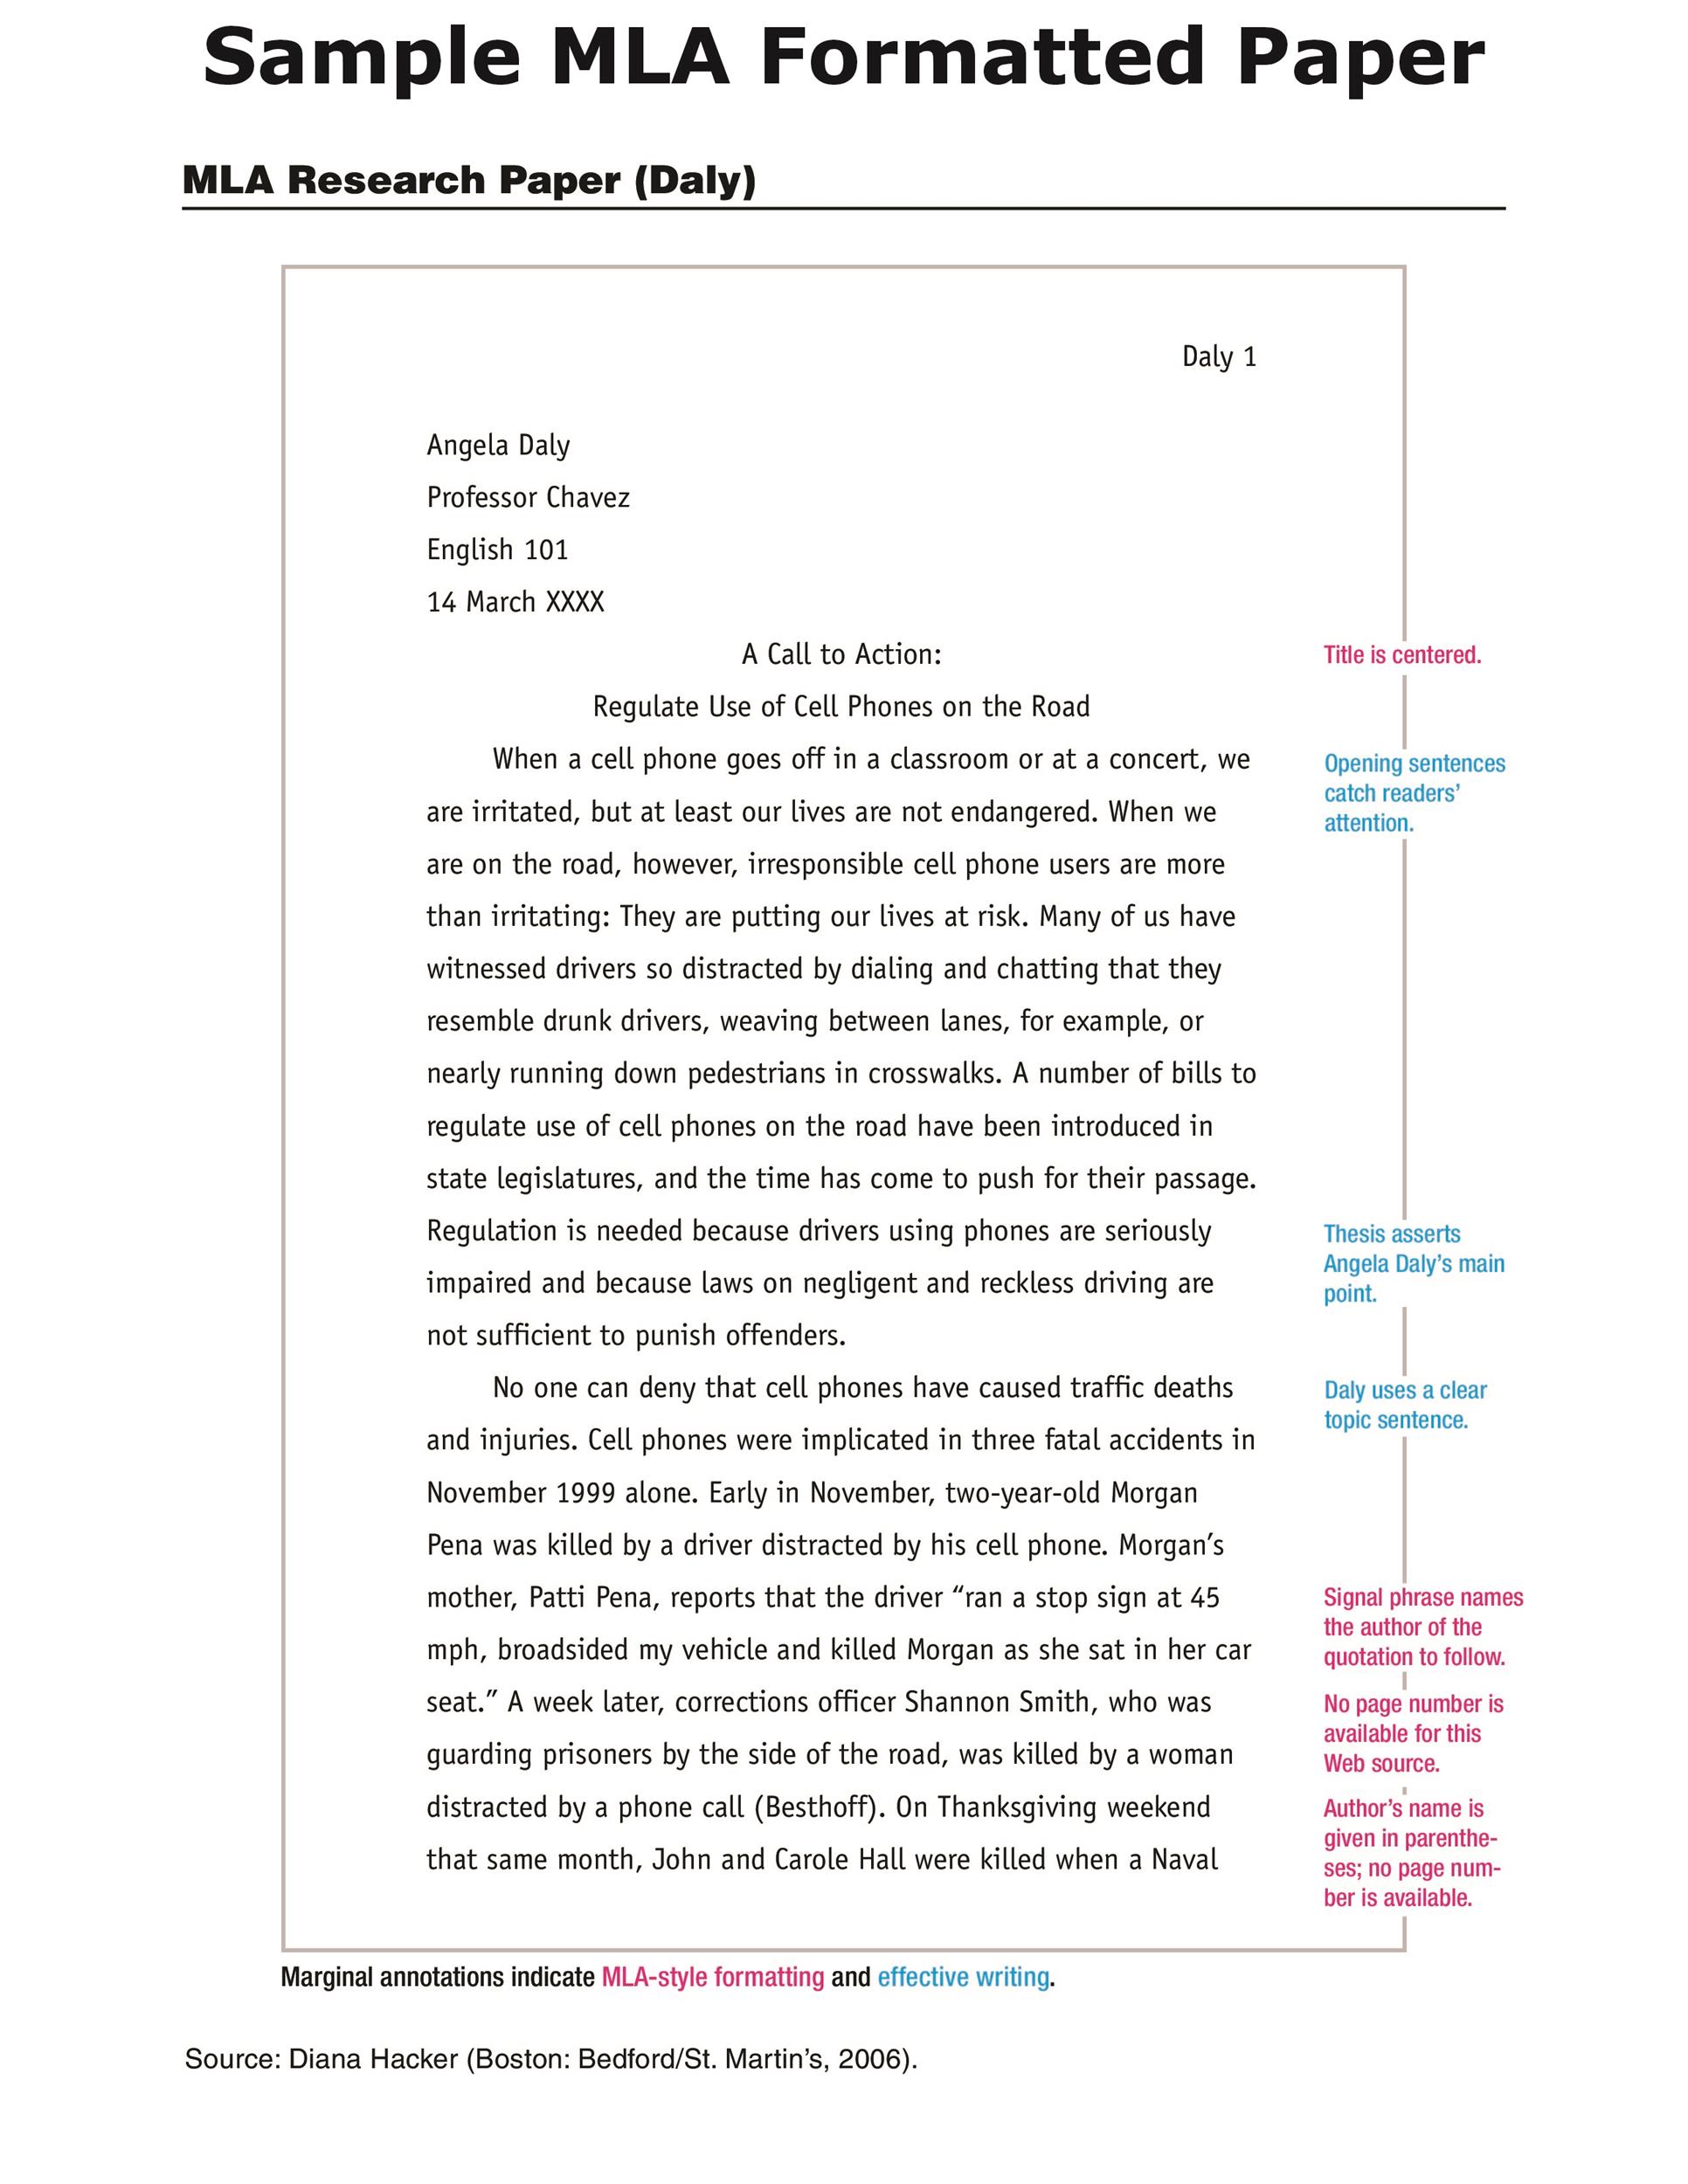 MLA Format for Academic Papers and Essays | Scientific Editing